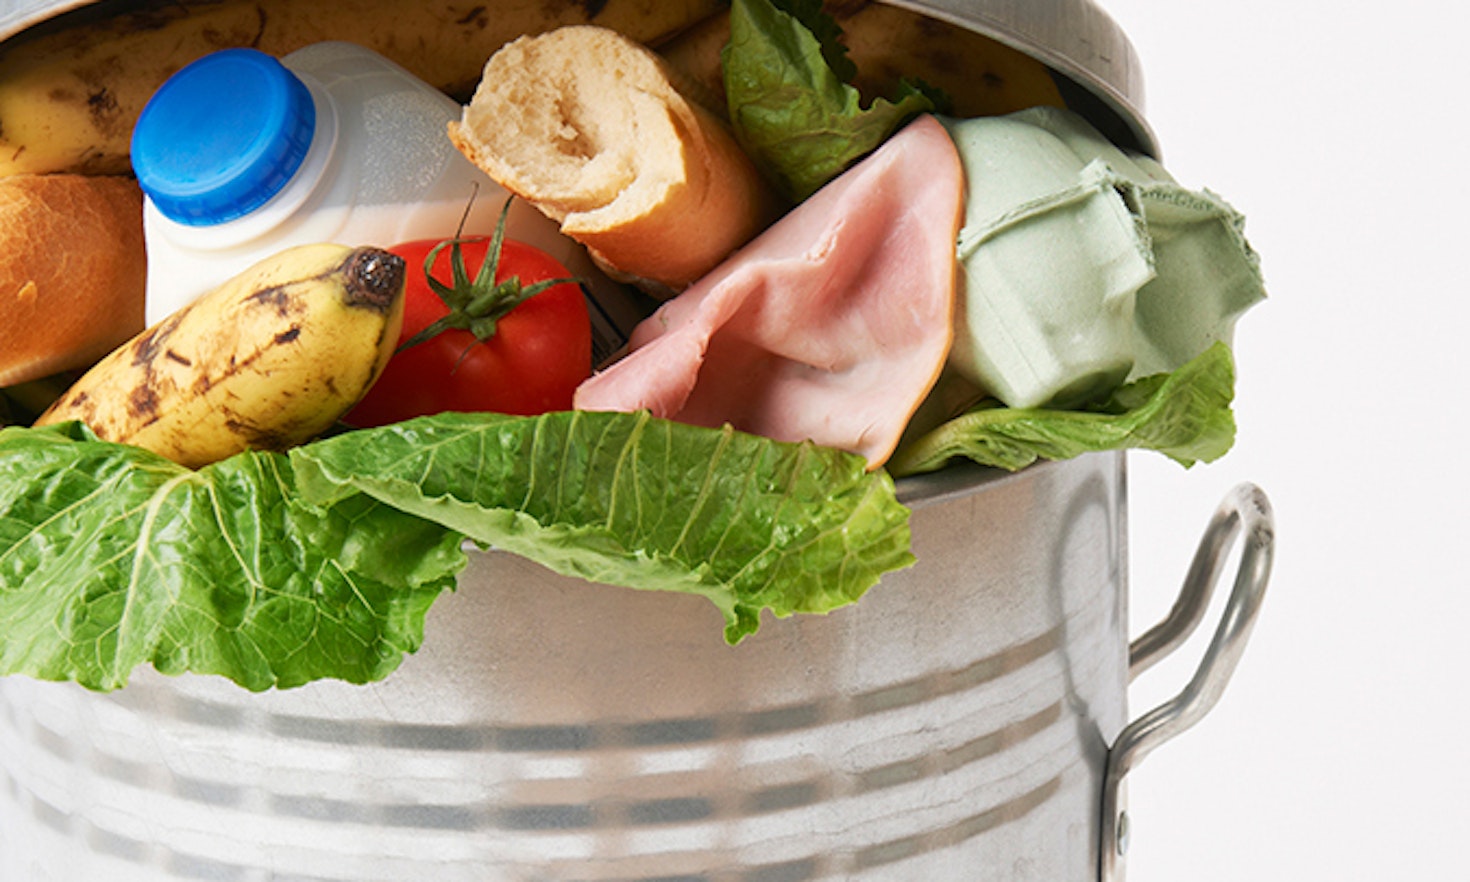 FOOD WASTE: Time for a sustainable consumption lifestyle